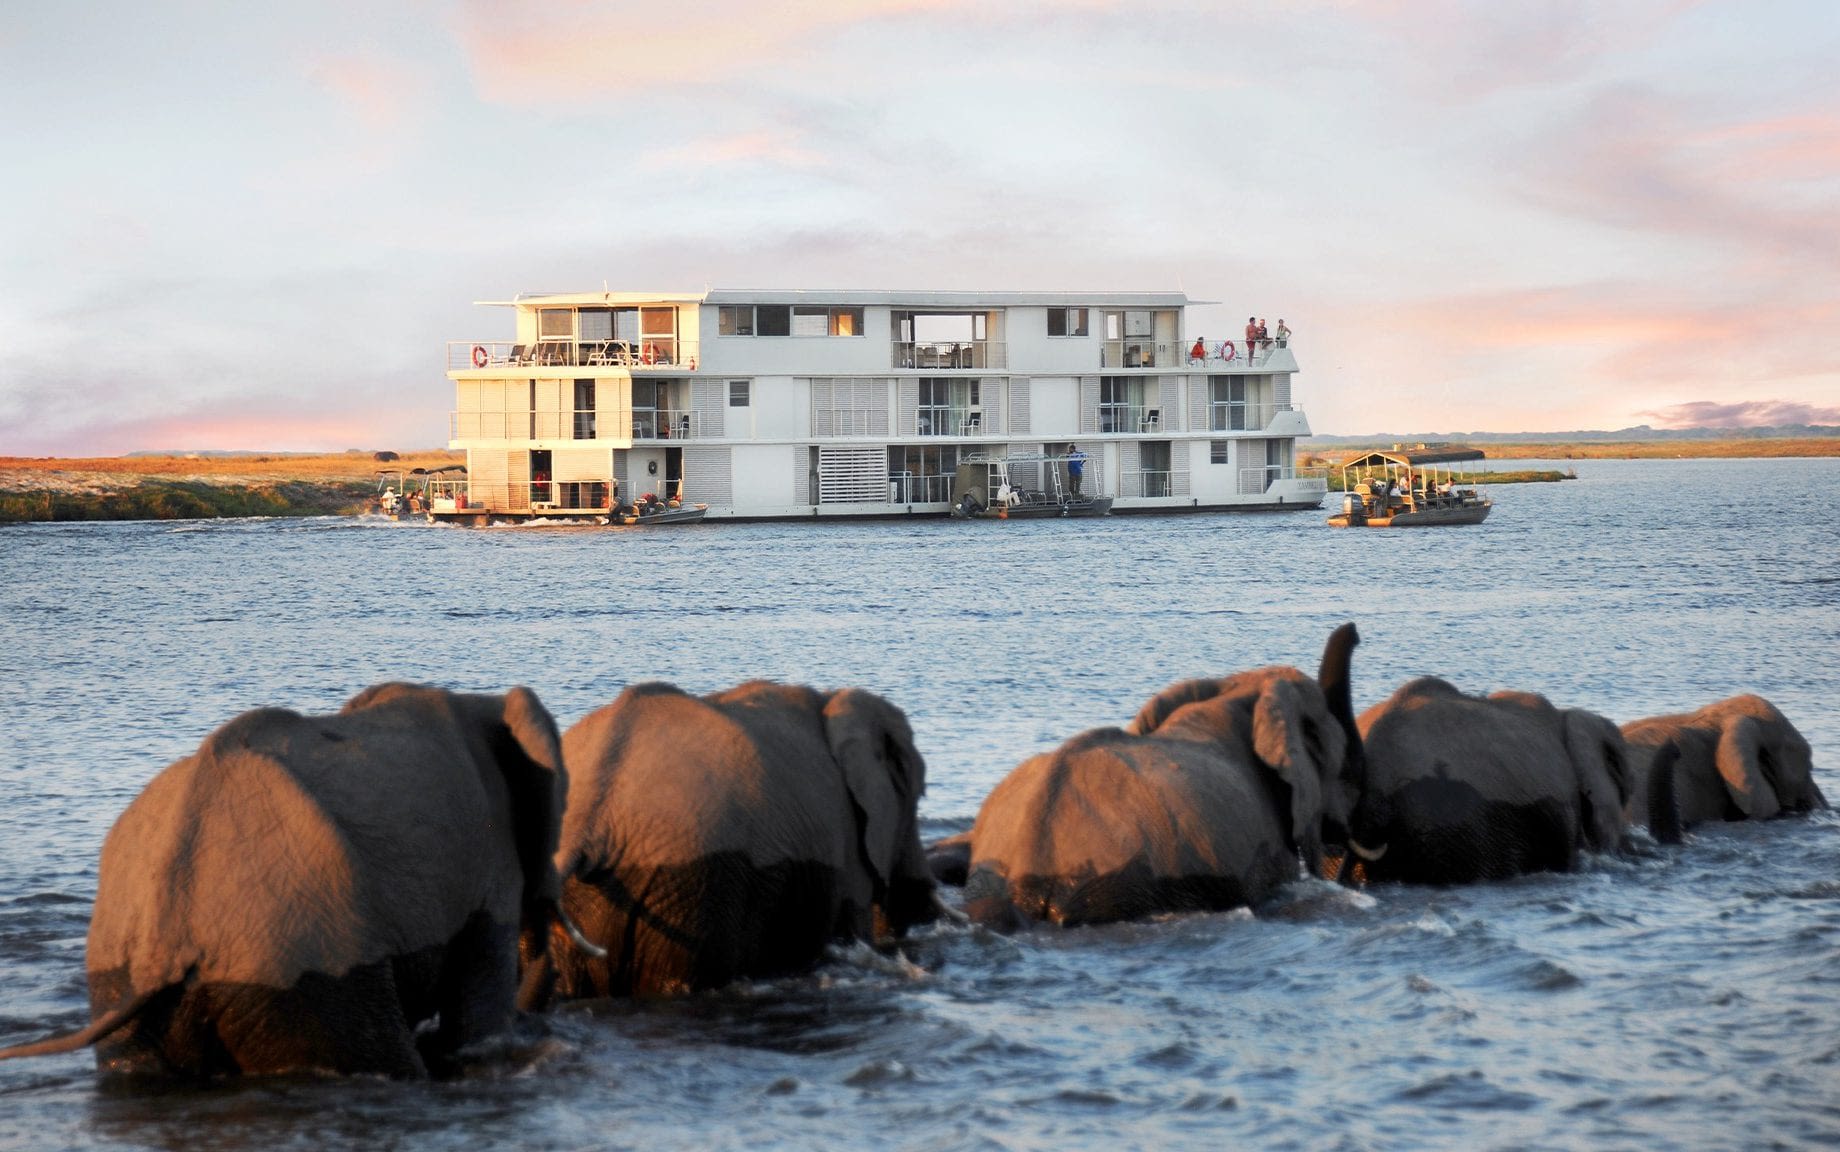 The world’s most unusual river cruises